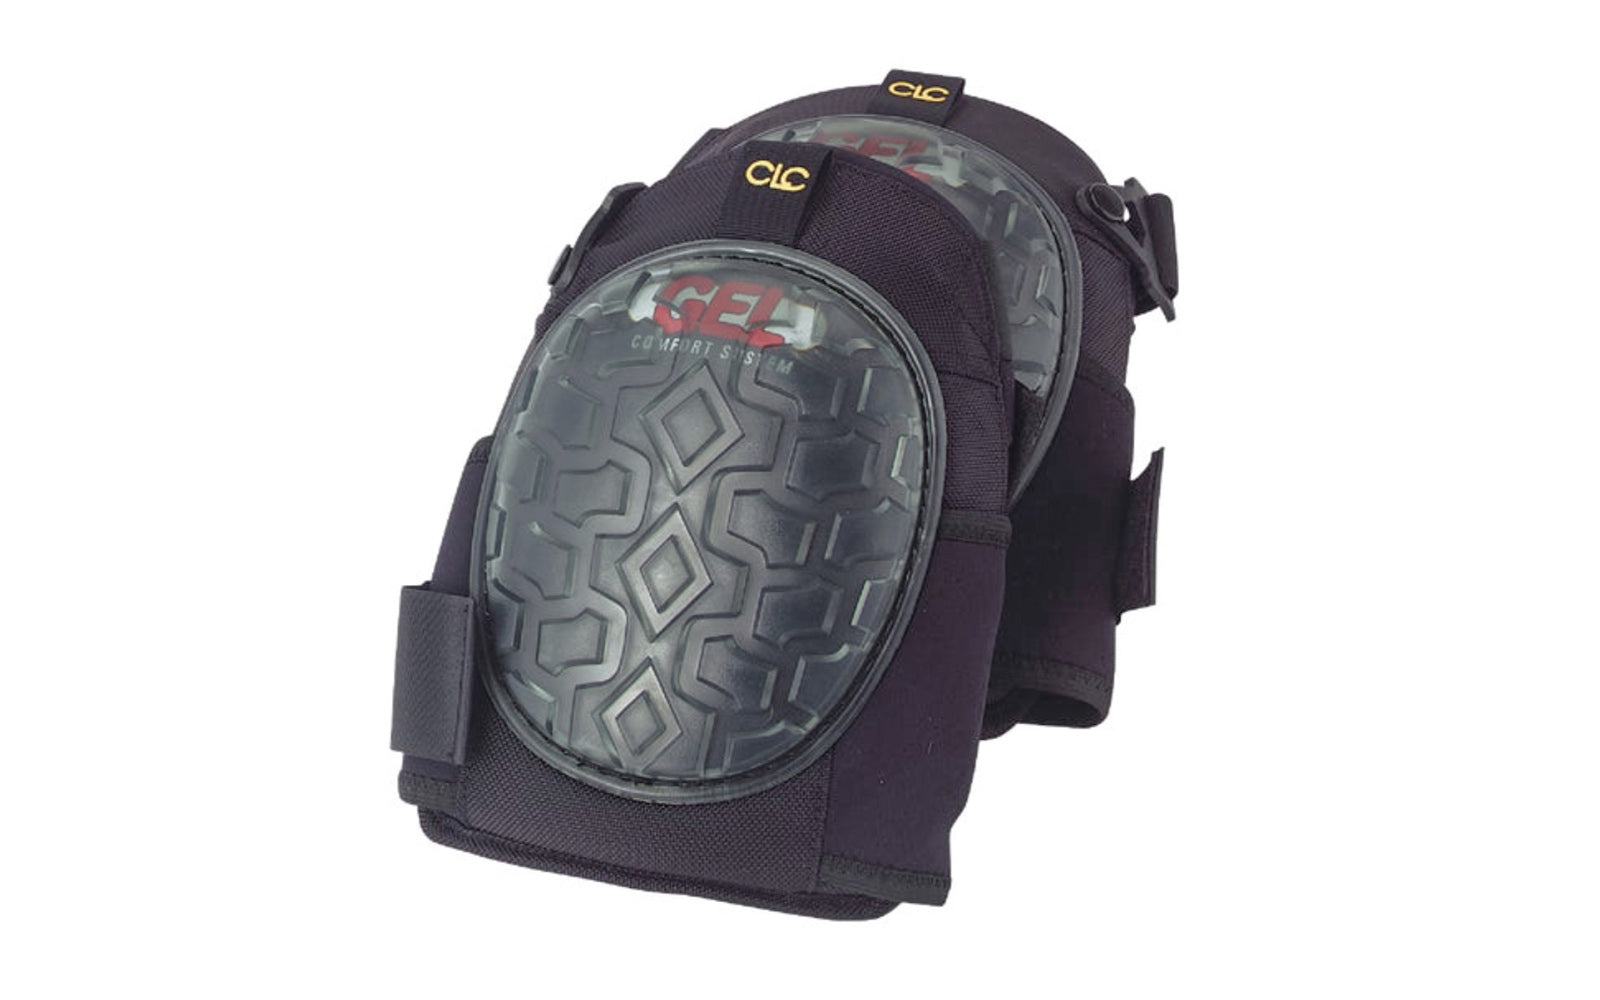 CLC Professional Gel Kneepads. Special CLC Comfort Target gel center provides maximum cushioning and all day wearability. Crafted from super tough 160D ballistic nylon. Larger caps are over sized for more protective coverage. Breathable neoprene lower straps secure below the knee. GrabTab for easy positioning of kneepad. Used by masons, tile contractors, and professionals of all trades.  CLC Model No. G340.